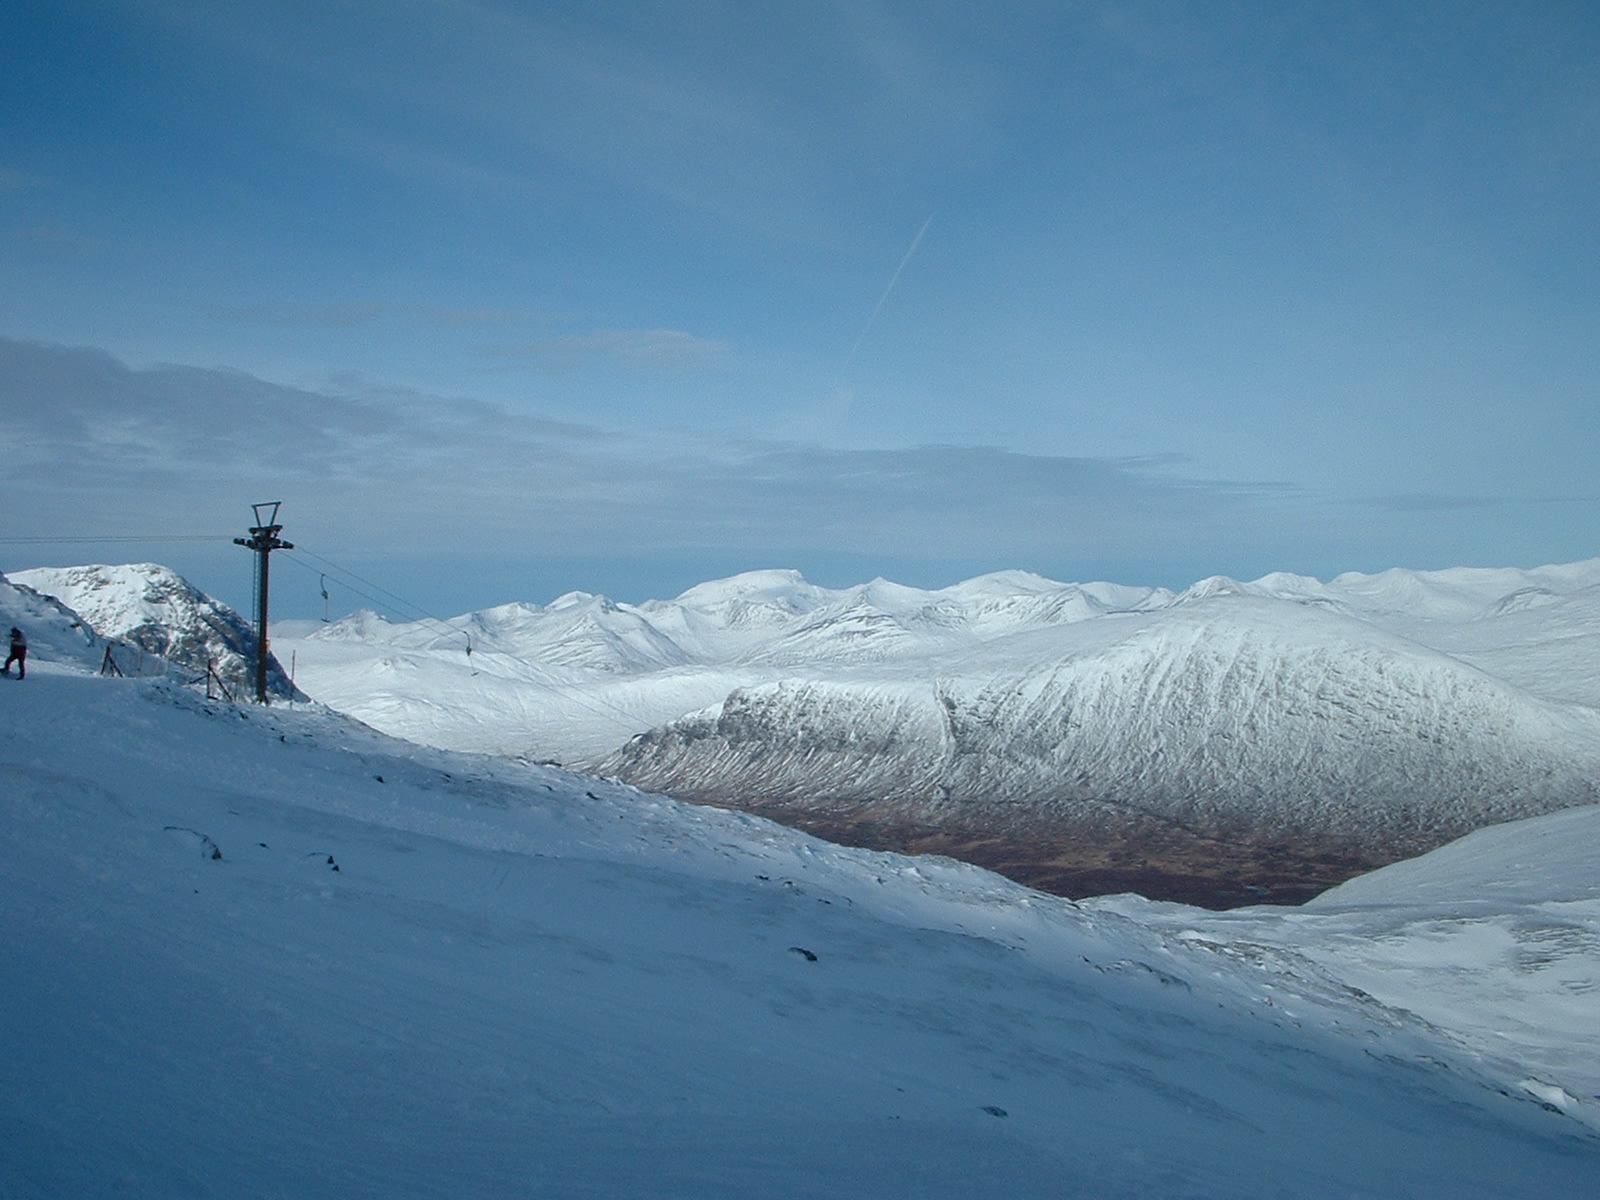 Looking out towards the Nevis range from glencoe